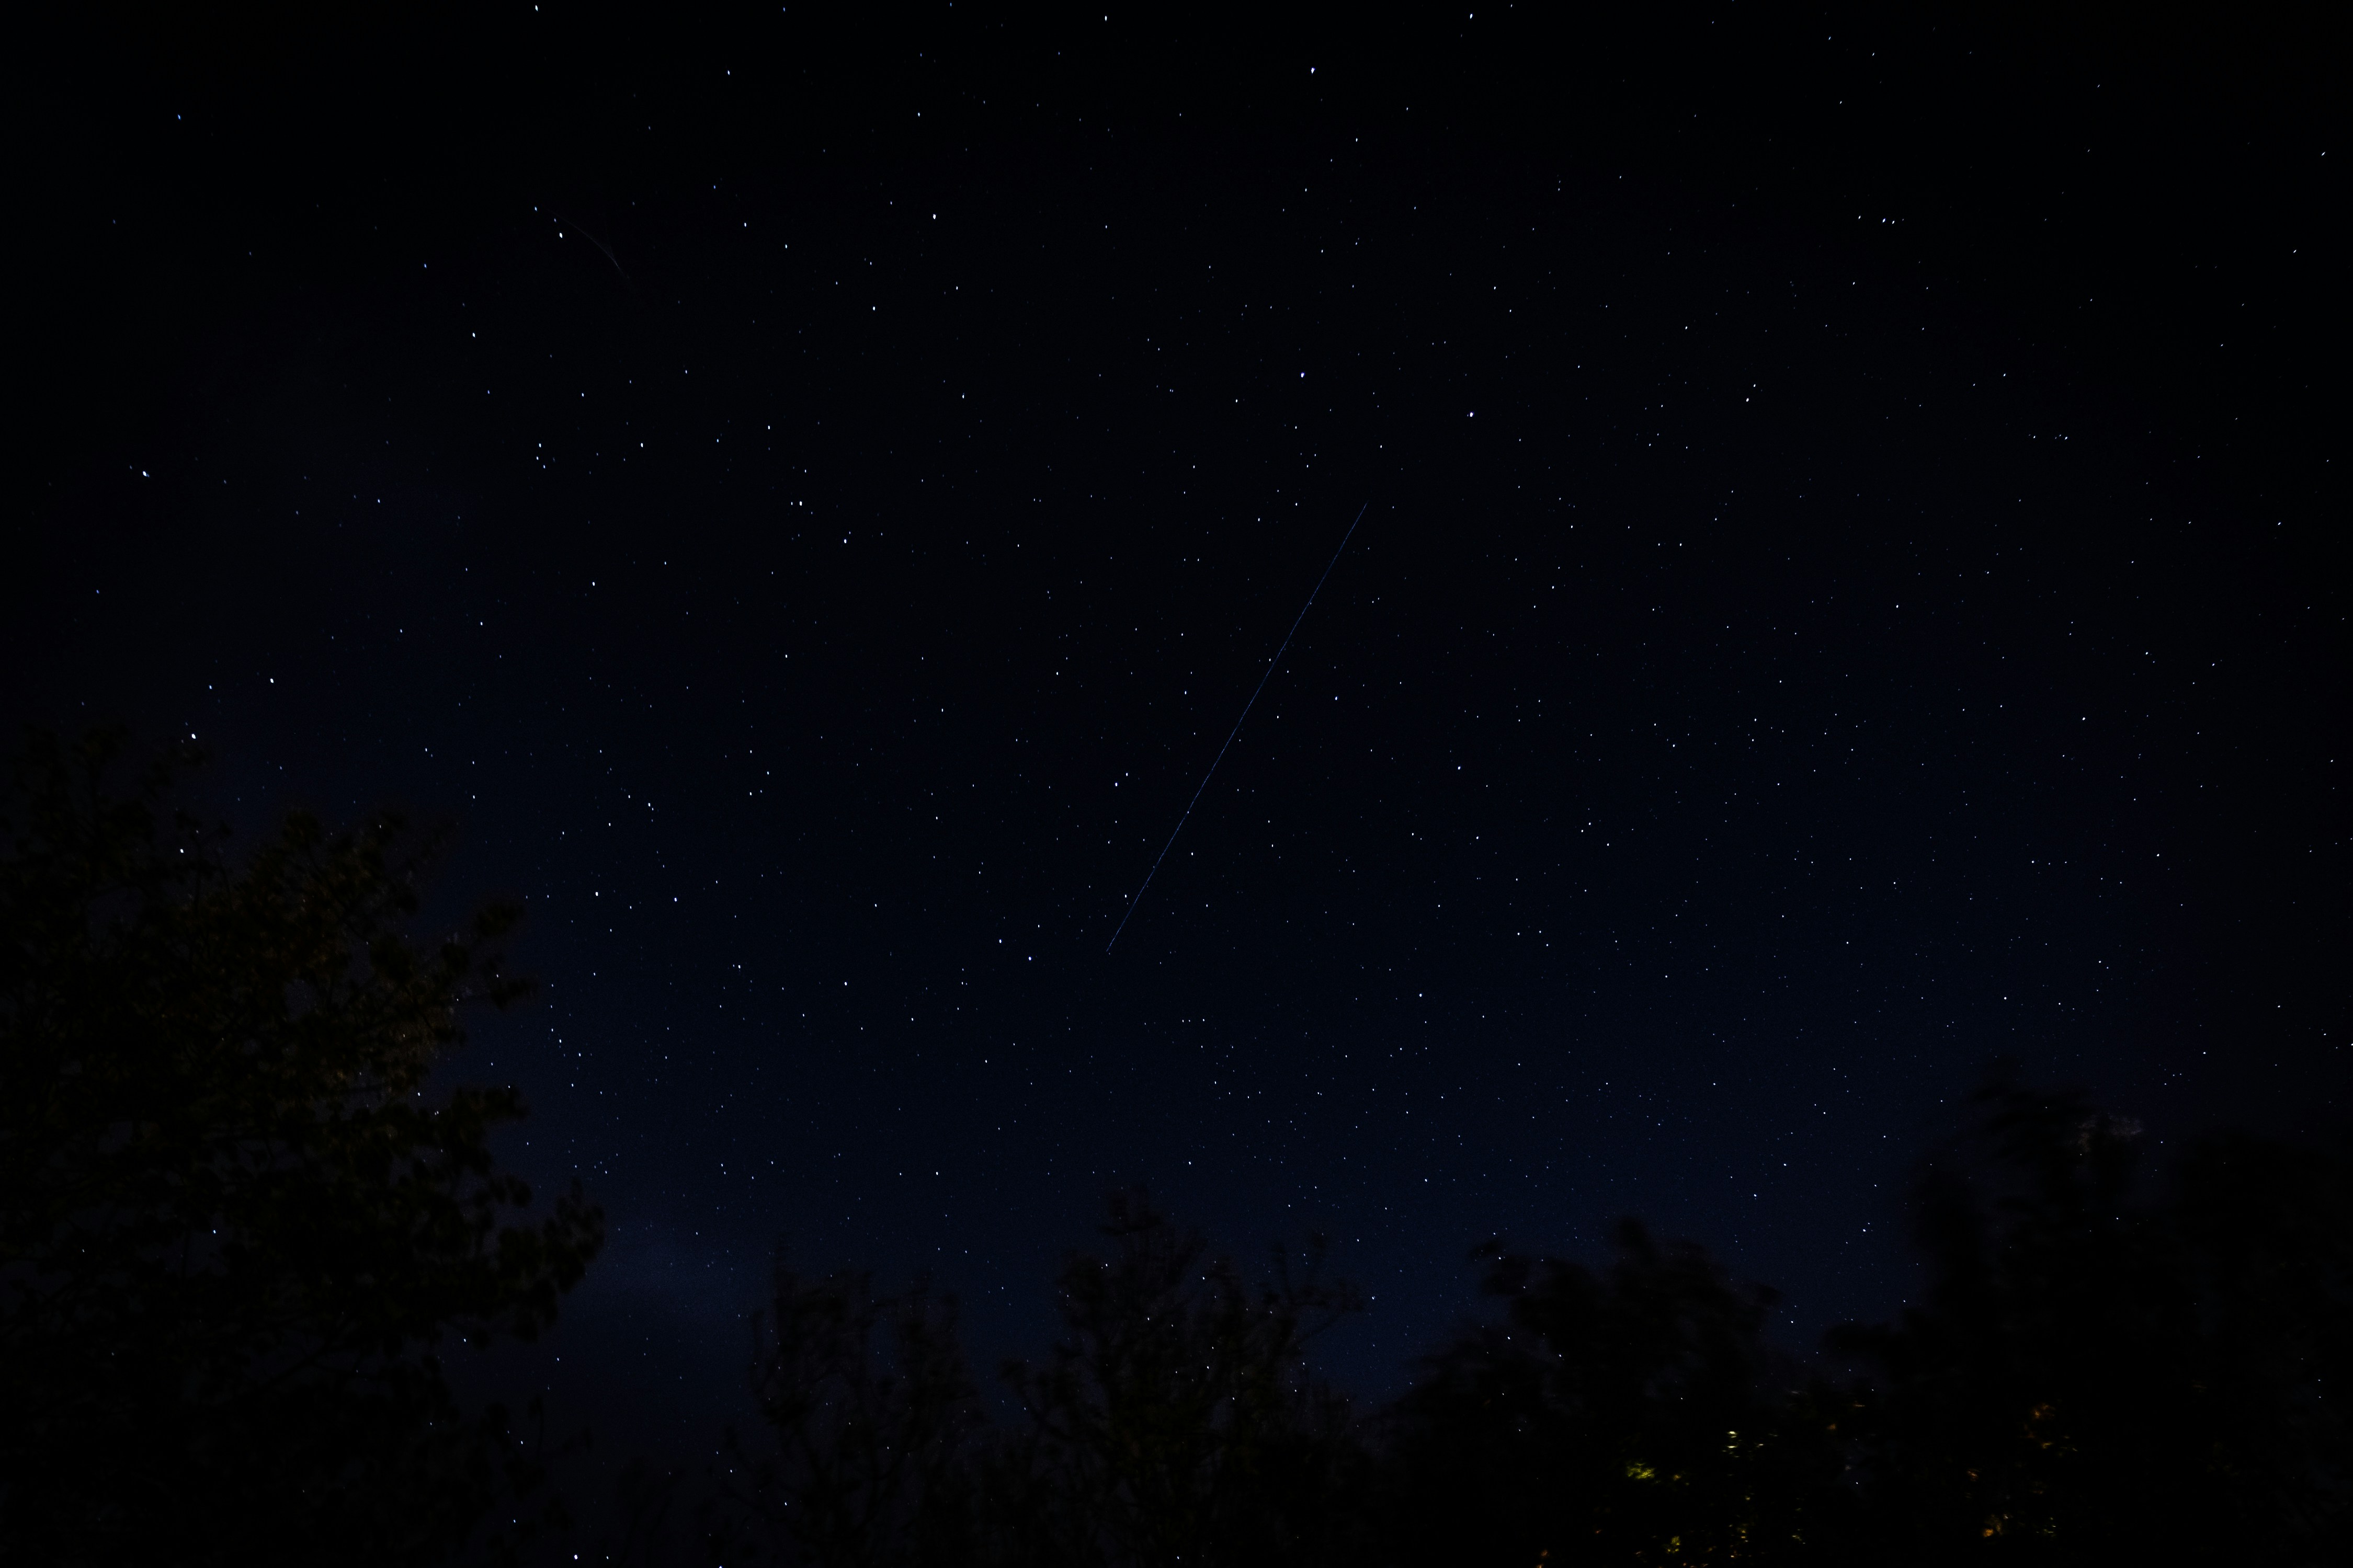 A Starlink satellite going over my garden on 20th April 2020